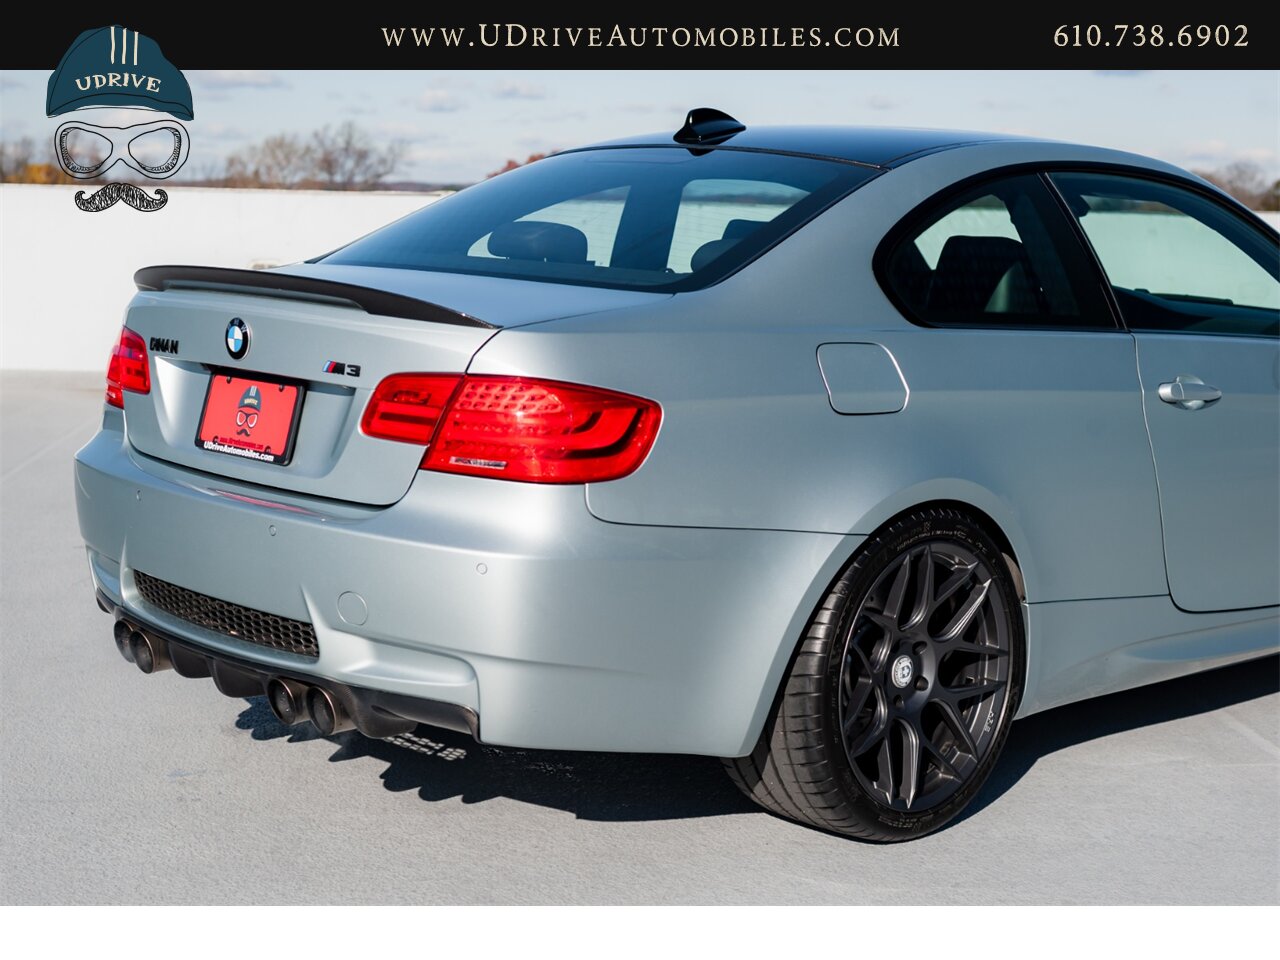 2008 BMW M3 Dinan S3-R M3 1 of 36 Produced DCT  1 Owner Full Service History 4.6L Stroker V8 - Photo 19 - West Chester, PA 19382